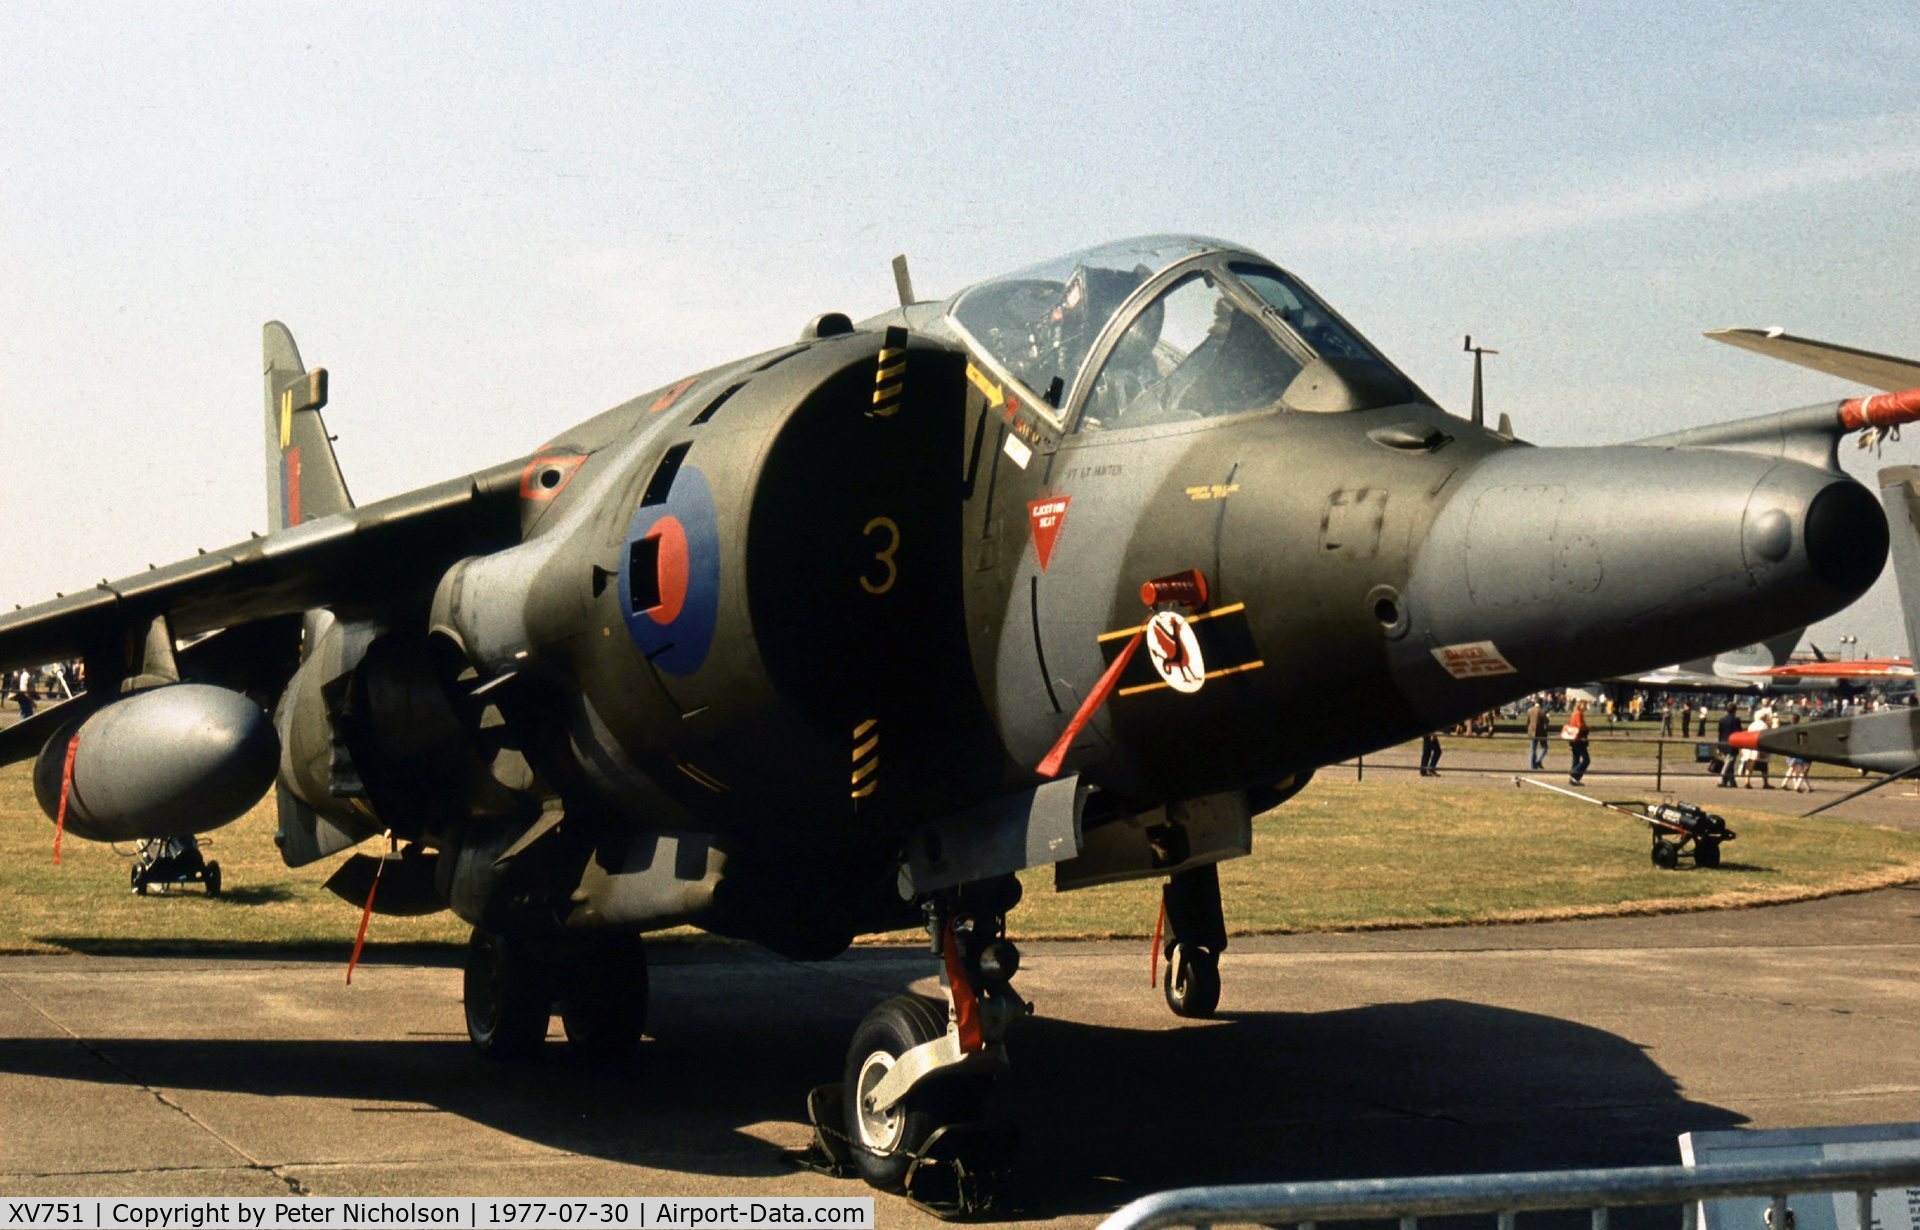 XV751, 1969 Hawker Siddeley Harrier GR.3 C/N 712014, Another view of the 3 Squadron Harrier GR.3 on display at the 1977 Royal Review at RAF Finningley.